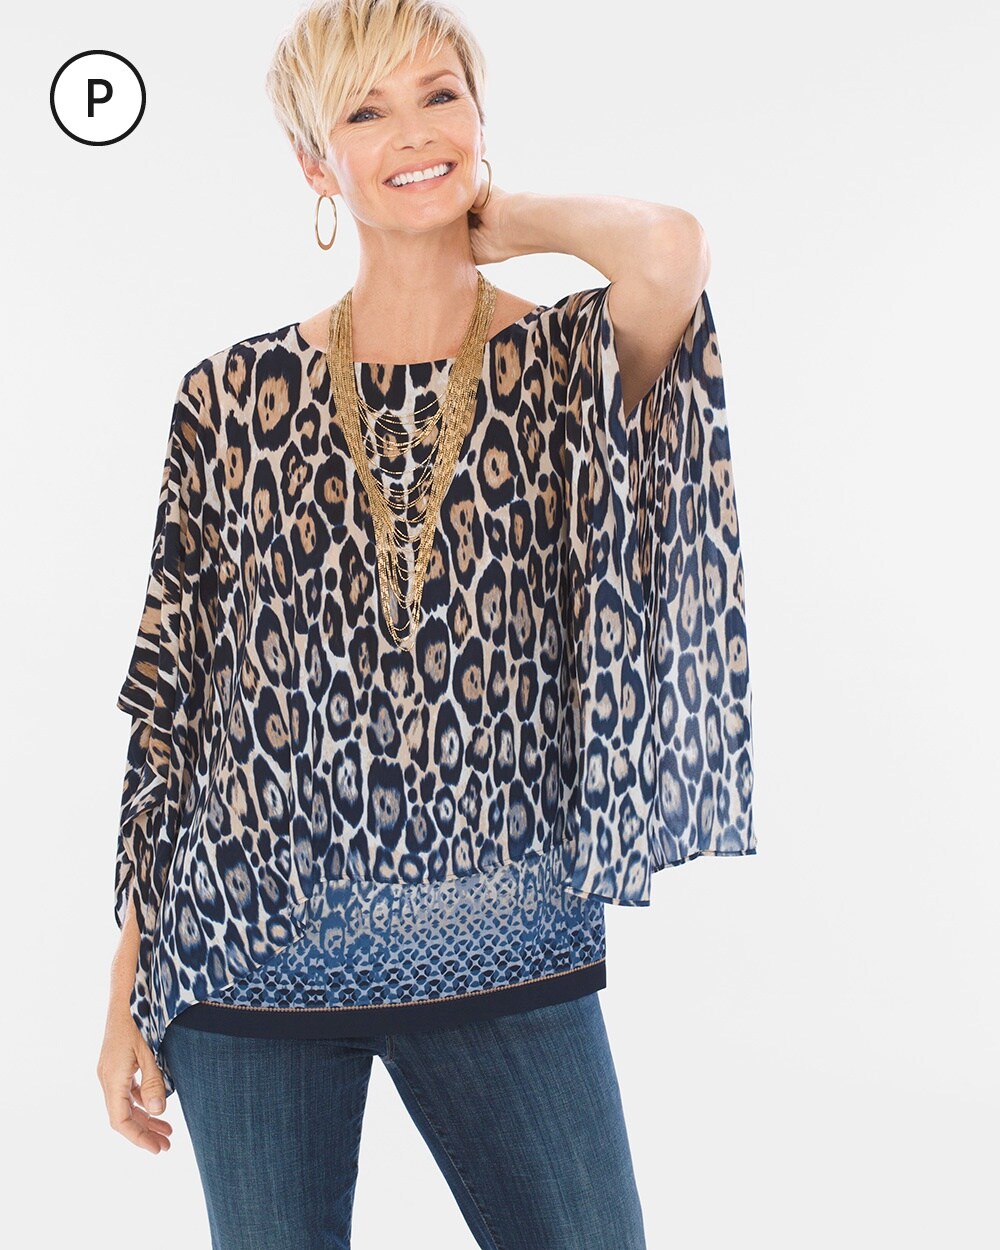 Travelers Collection Petite Ombre Layered Top